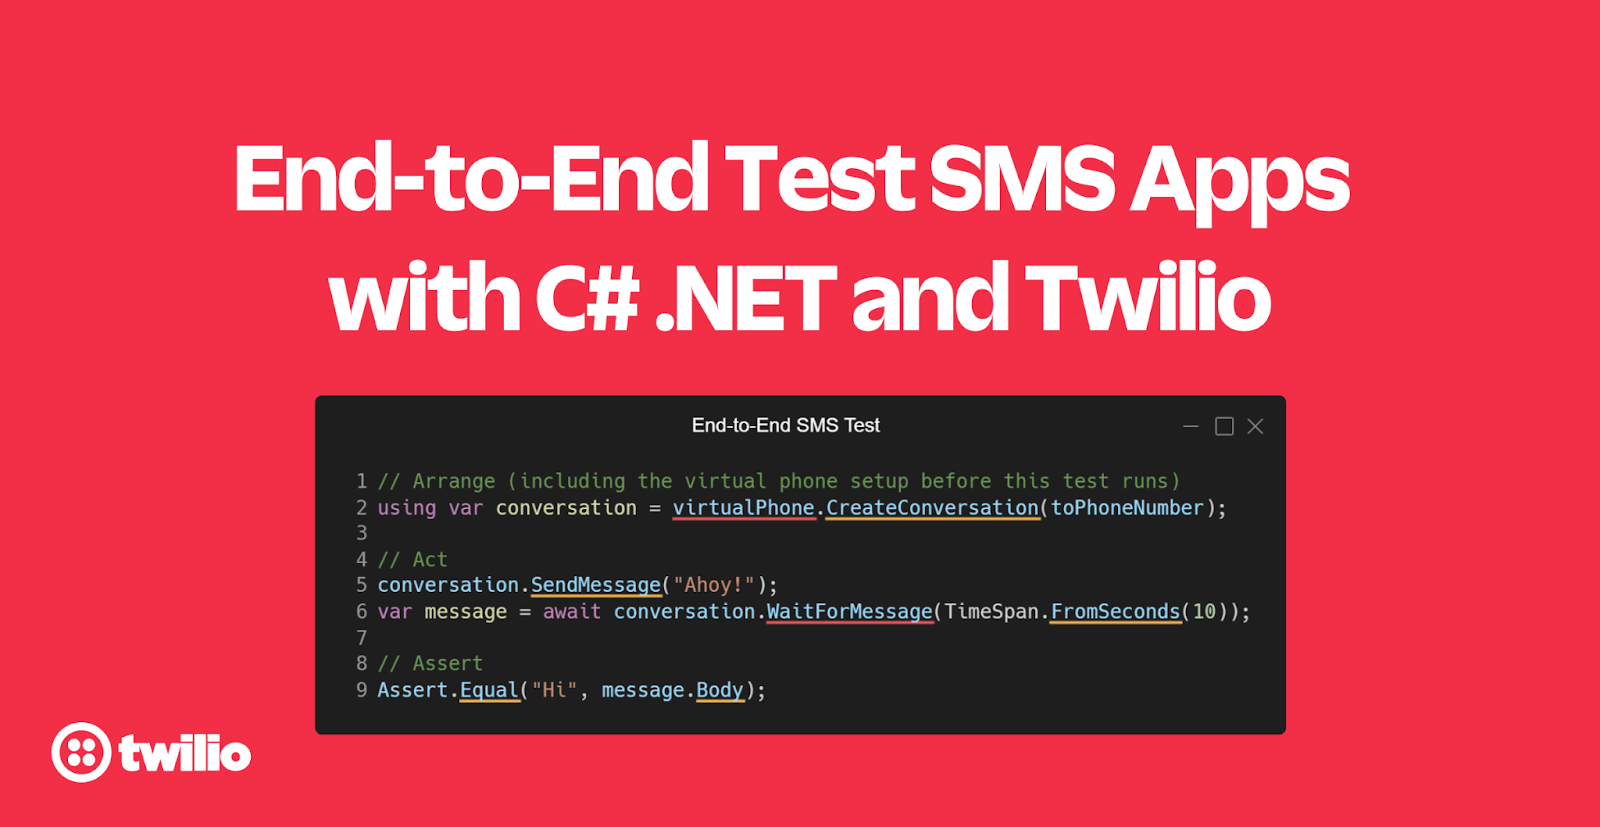 End-to-End Test SMS Apps  with C# .NET and Twilio